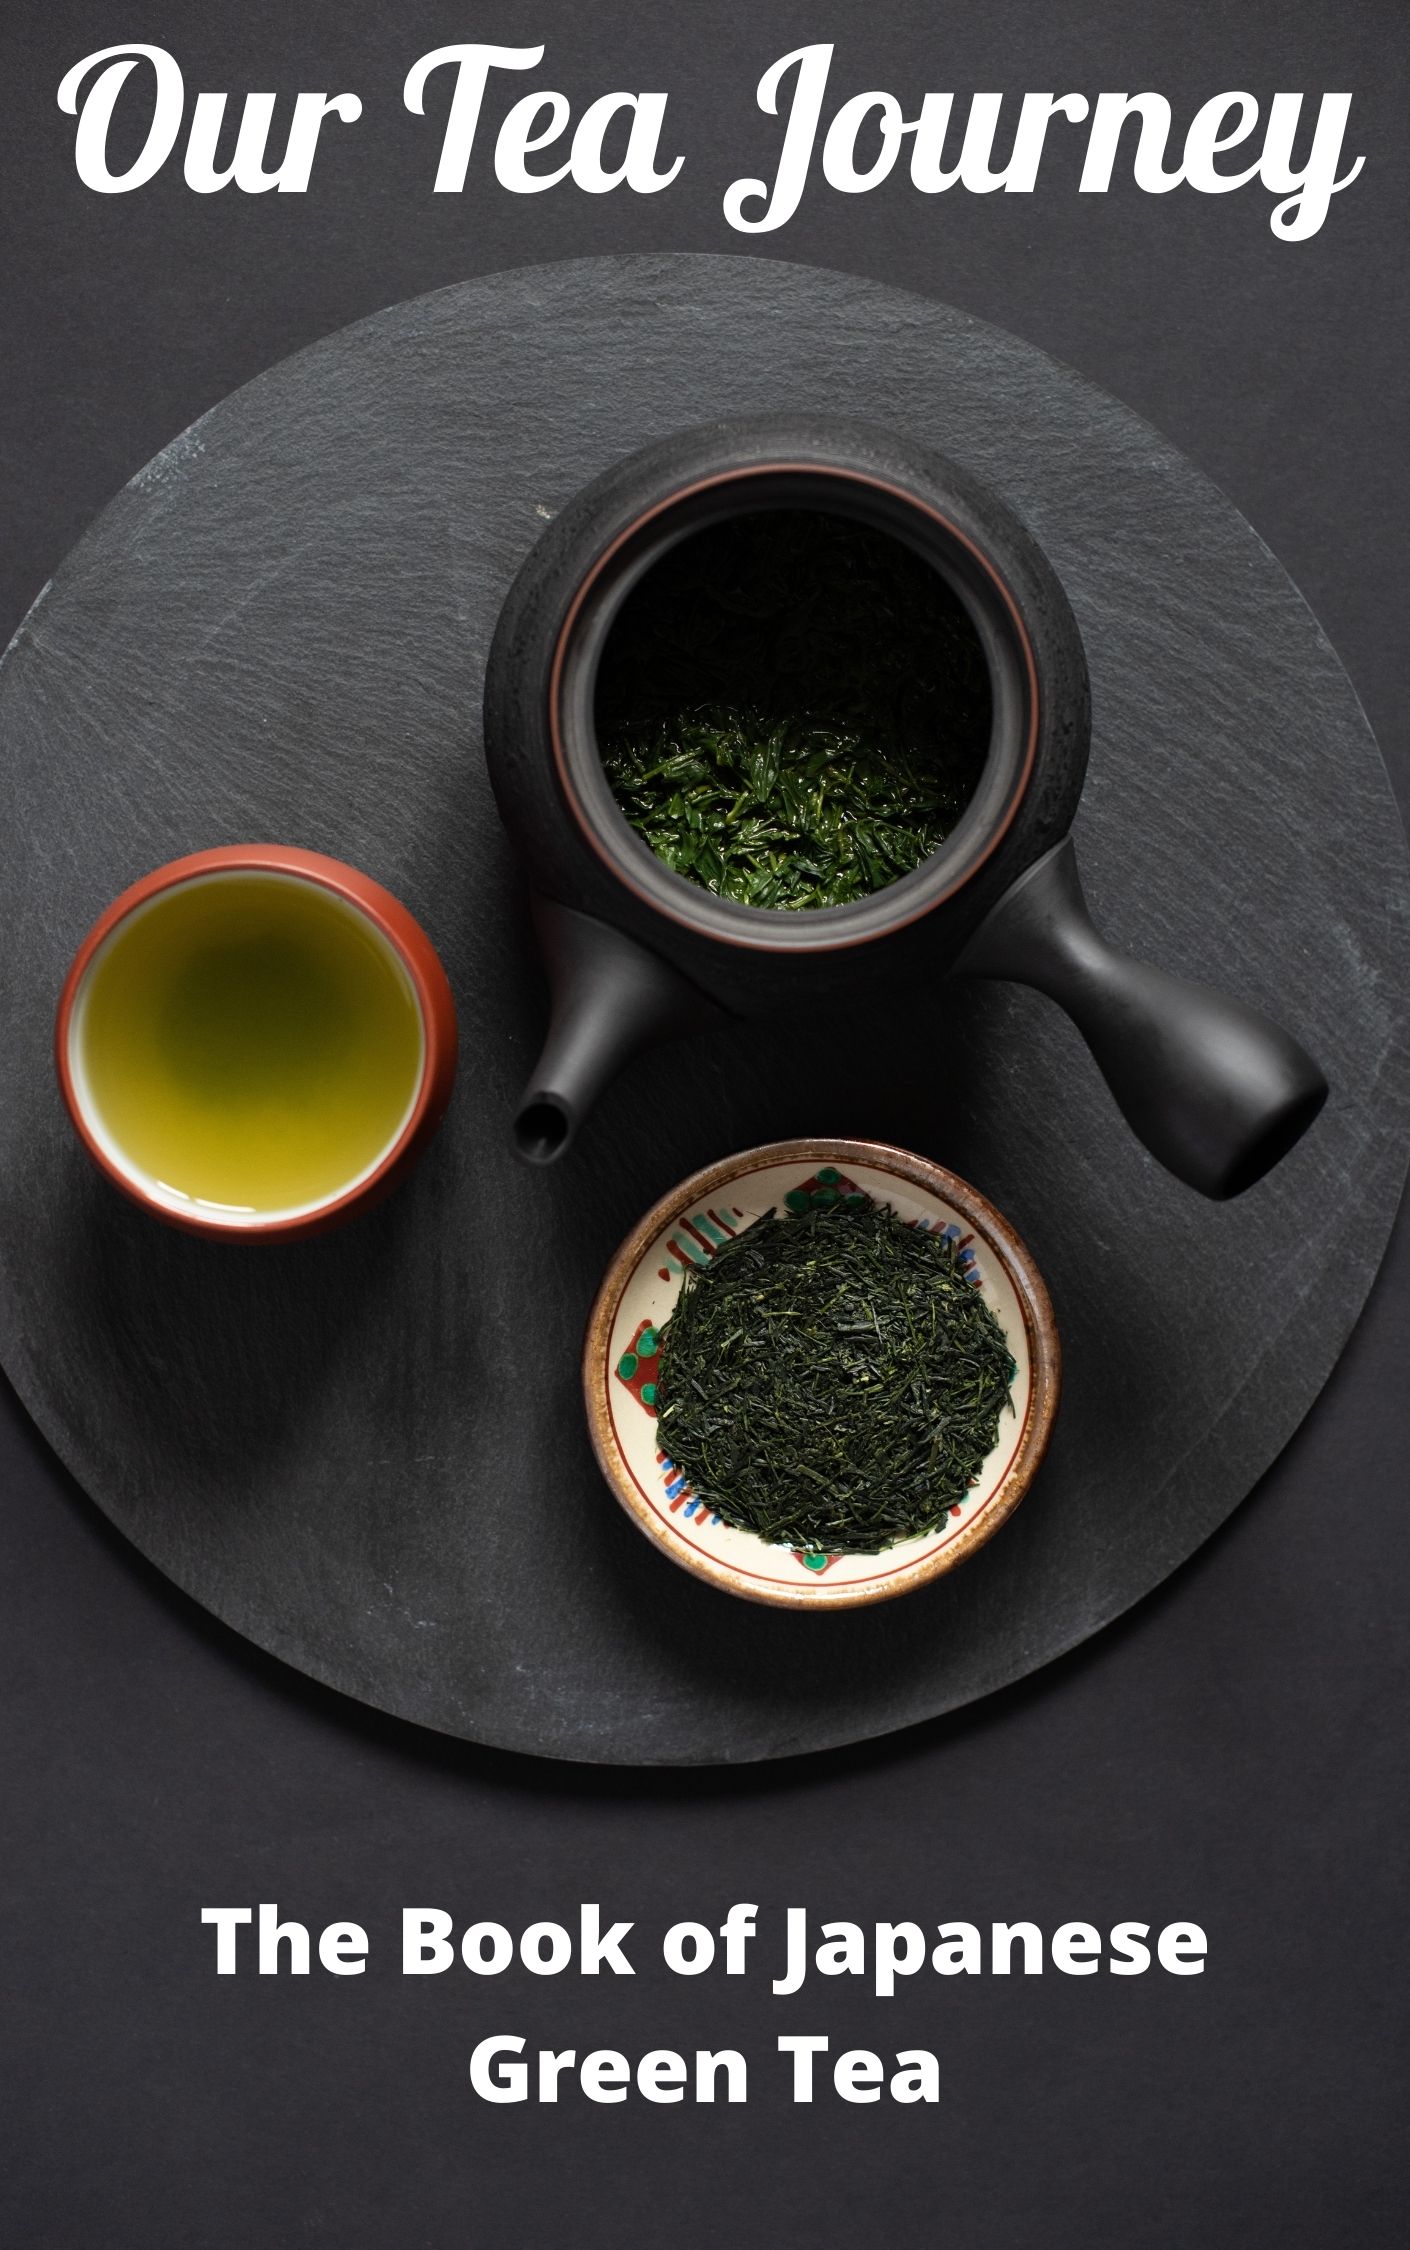 FREE: Our Tea Journey: The Book of Japanese Green Tea: How Japanese green tea is grown, produced, prepared and enjoyed by Will Klingner